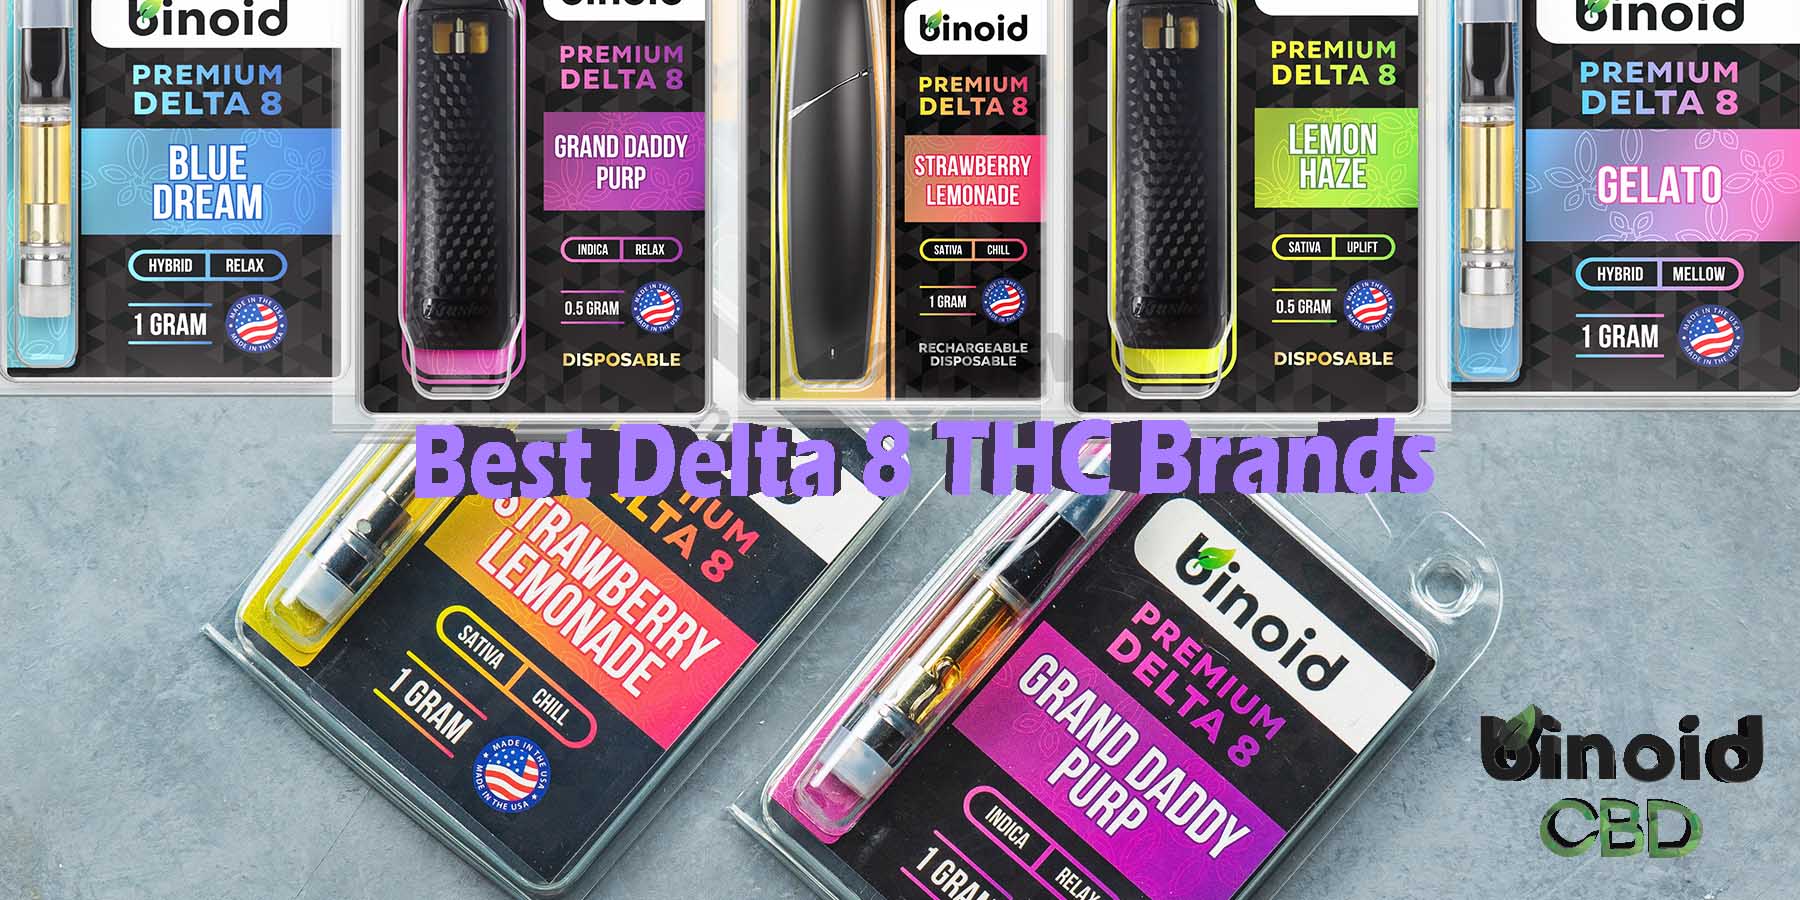 Best Delta 8 Brands Review Gram Review Take Work Online Best Brand Price Get Near Me Lowest Coupon Discount Store Shop Vapes Carts Online Strong